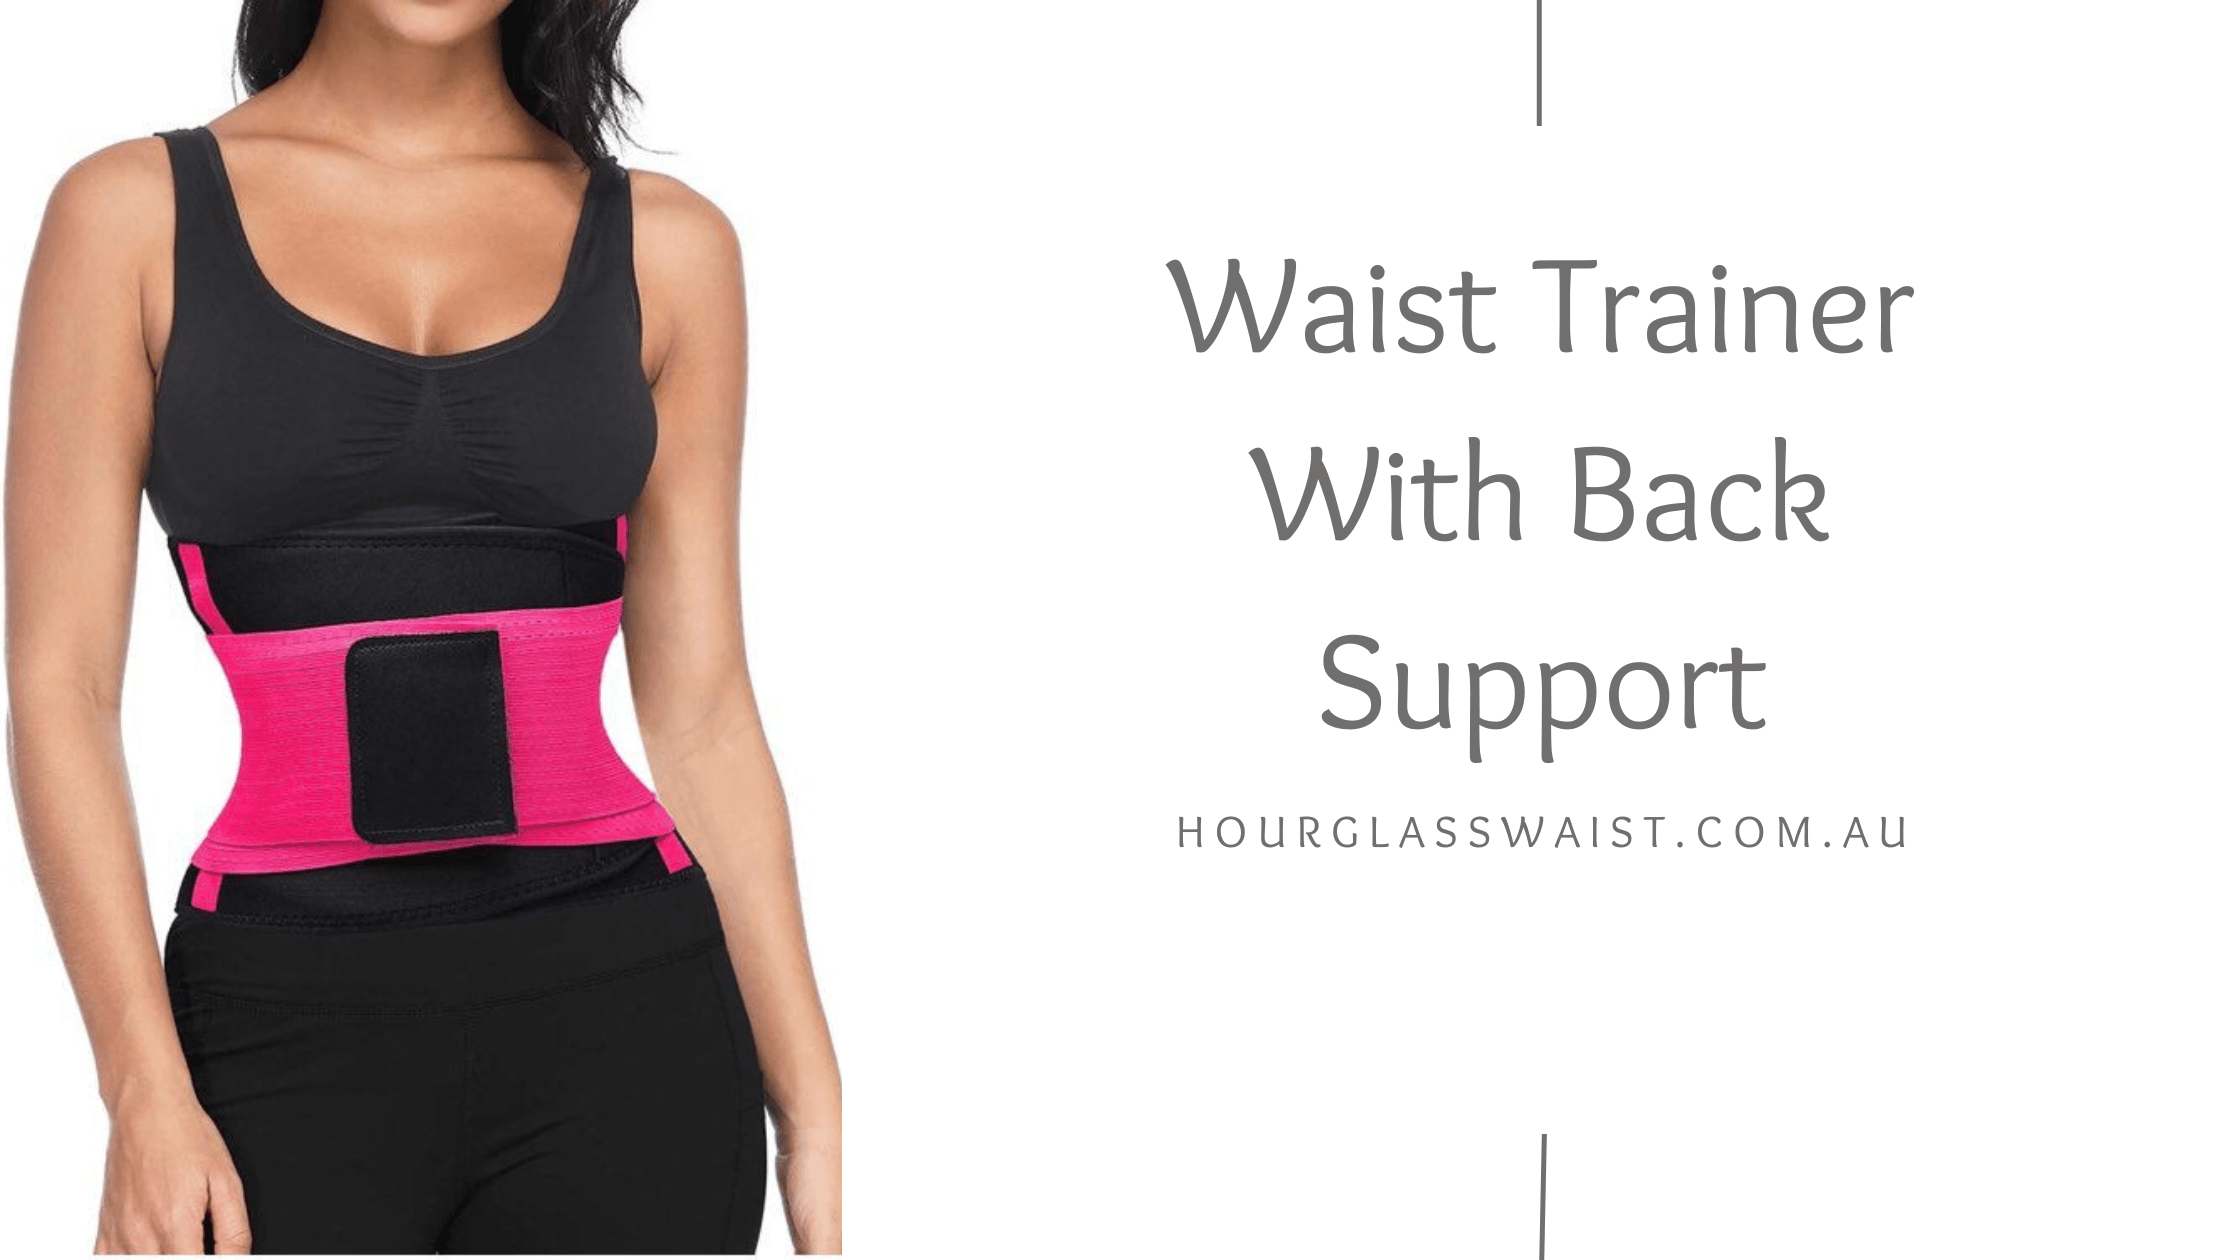 Waist Trainer With Back Support – Hourglass Waist